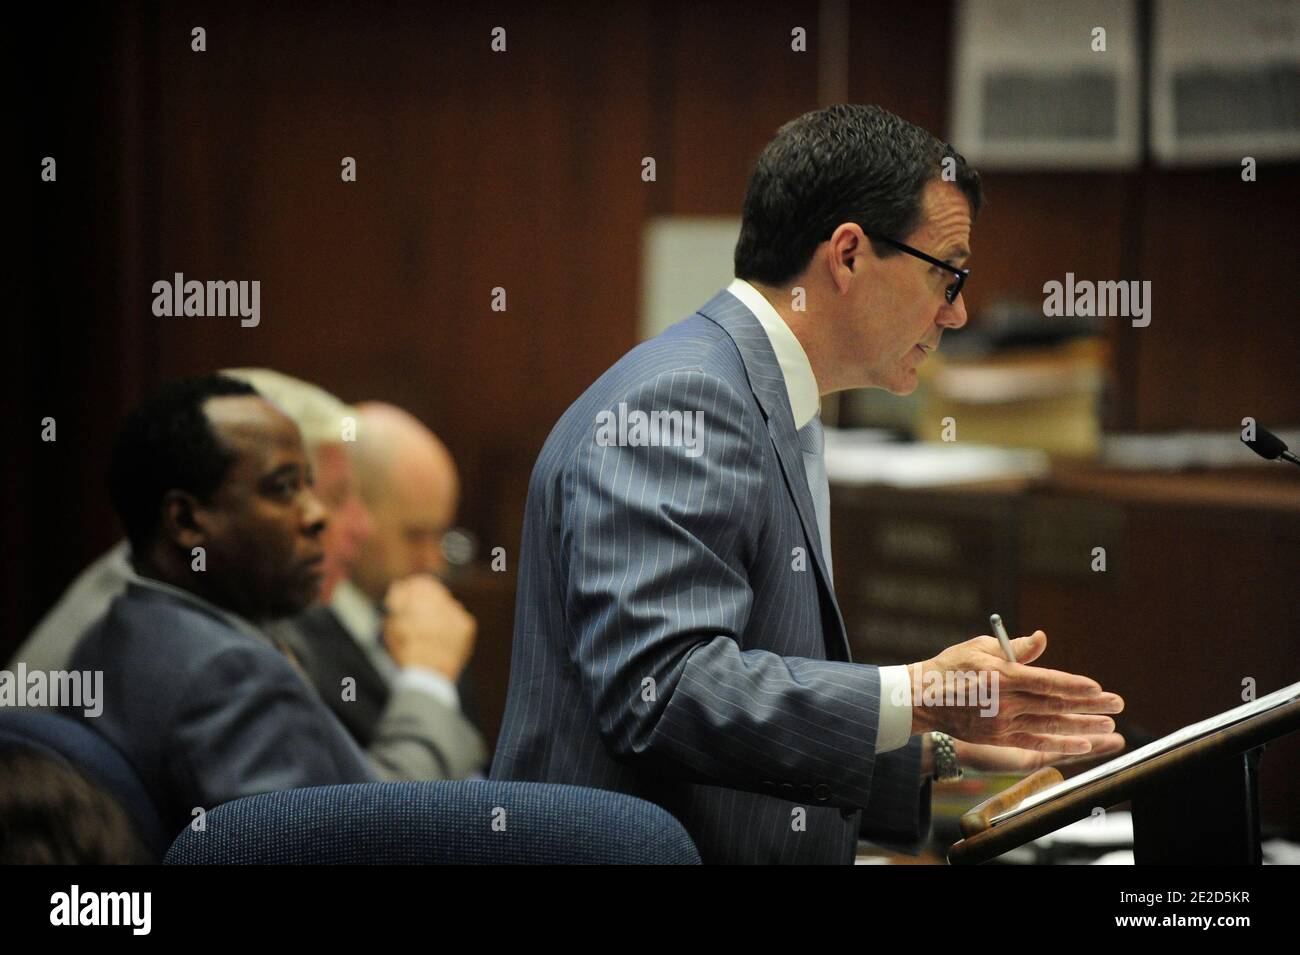 Defense attorney Ed Chernoff (R) cross examines propofol expert anesthesiology Dr. Steven Shafer as Dr. Conrad Murray (L) looks on in Los Angeles Superior Court during his involuntary manslaughter trial in Los Angeles, California, USA on 24 October 2011. Murray has pleaded not guilty and faces four years in prison and the loss of his medical licenses if convicted of involuntary manslaughter in Michael Jackson's death. Photo by Paul Buck/Pool/ABACAPRESS.COM Stock Photo